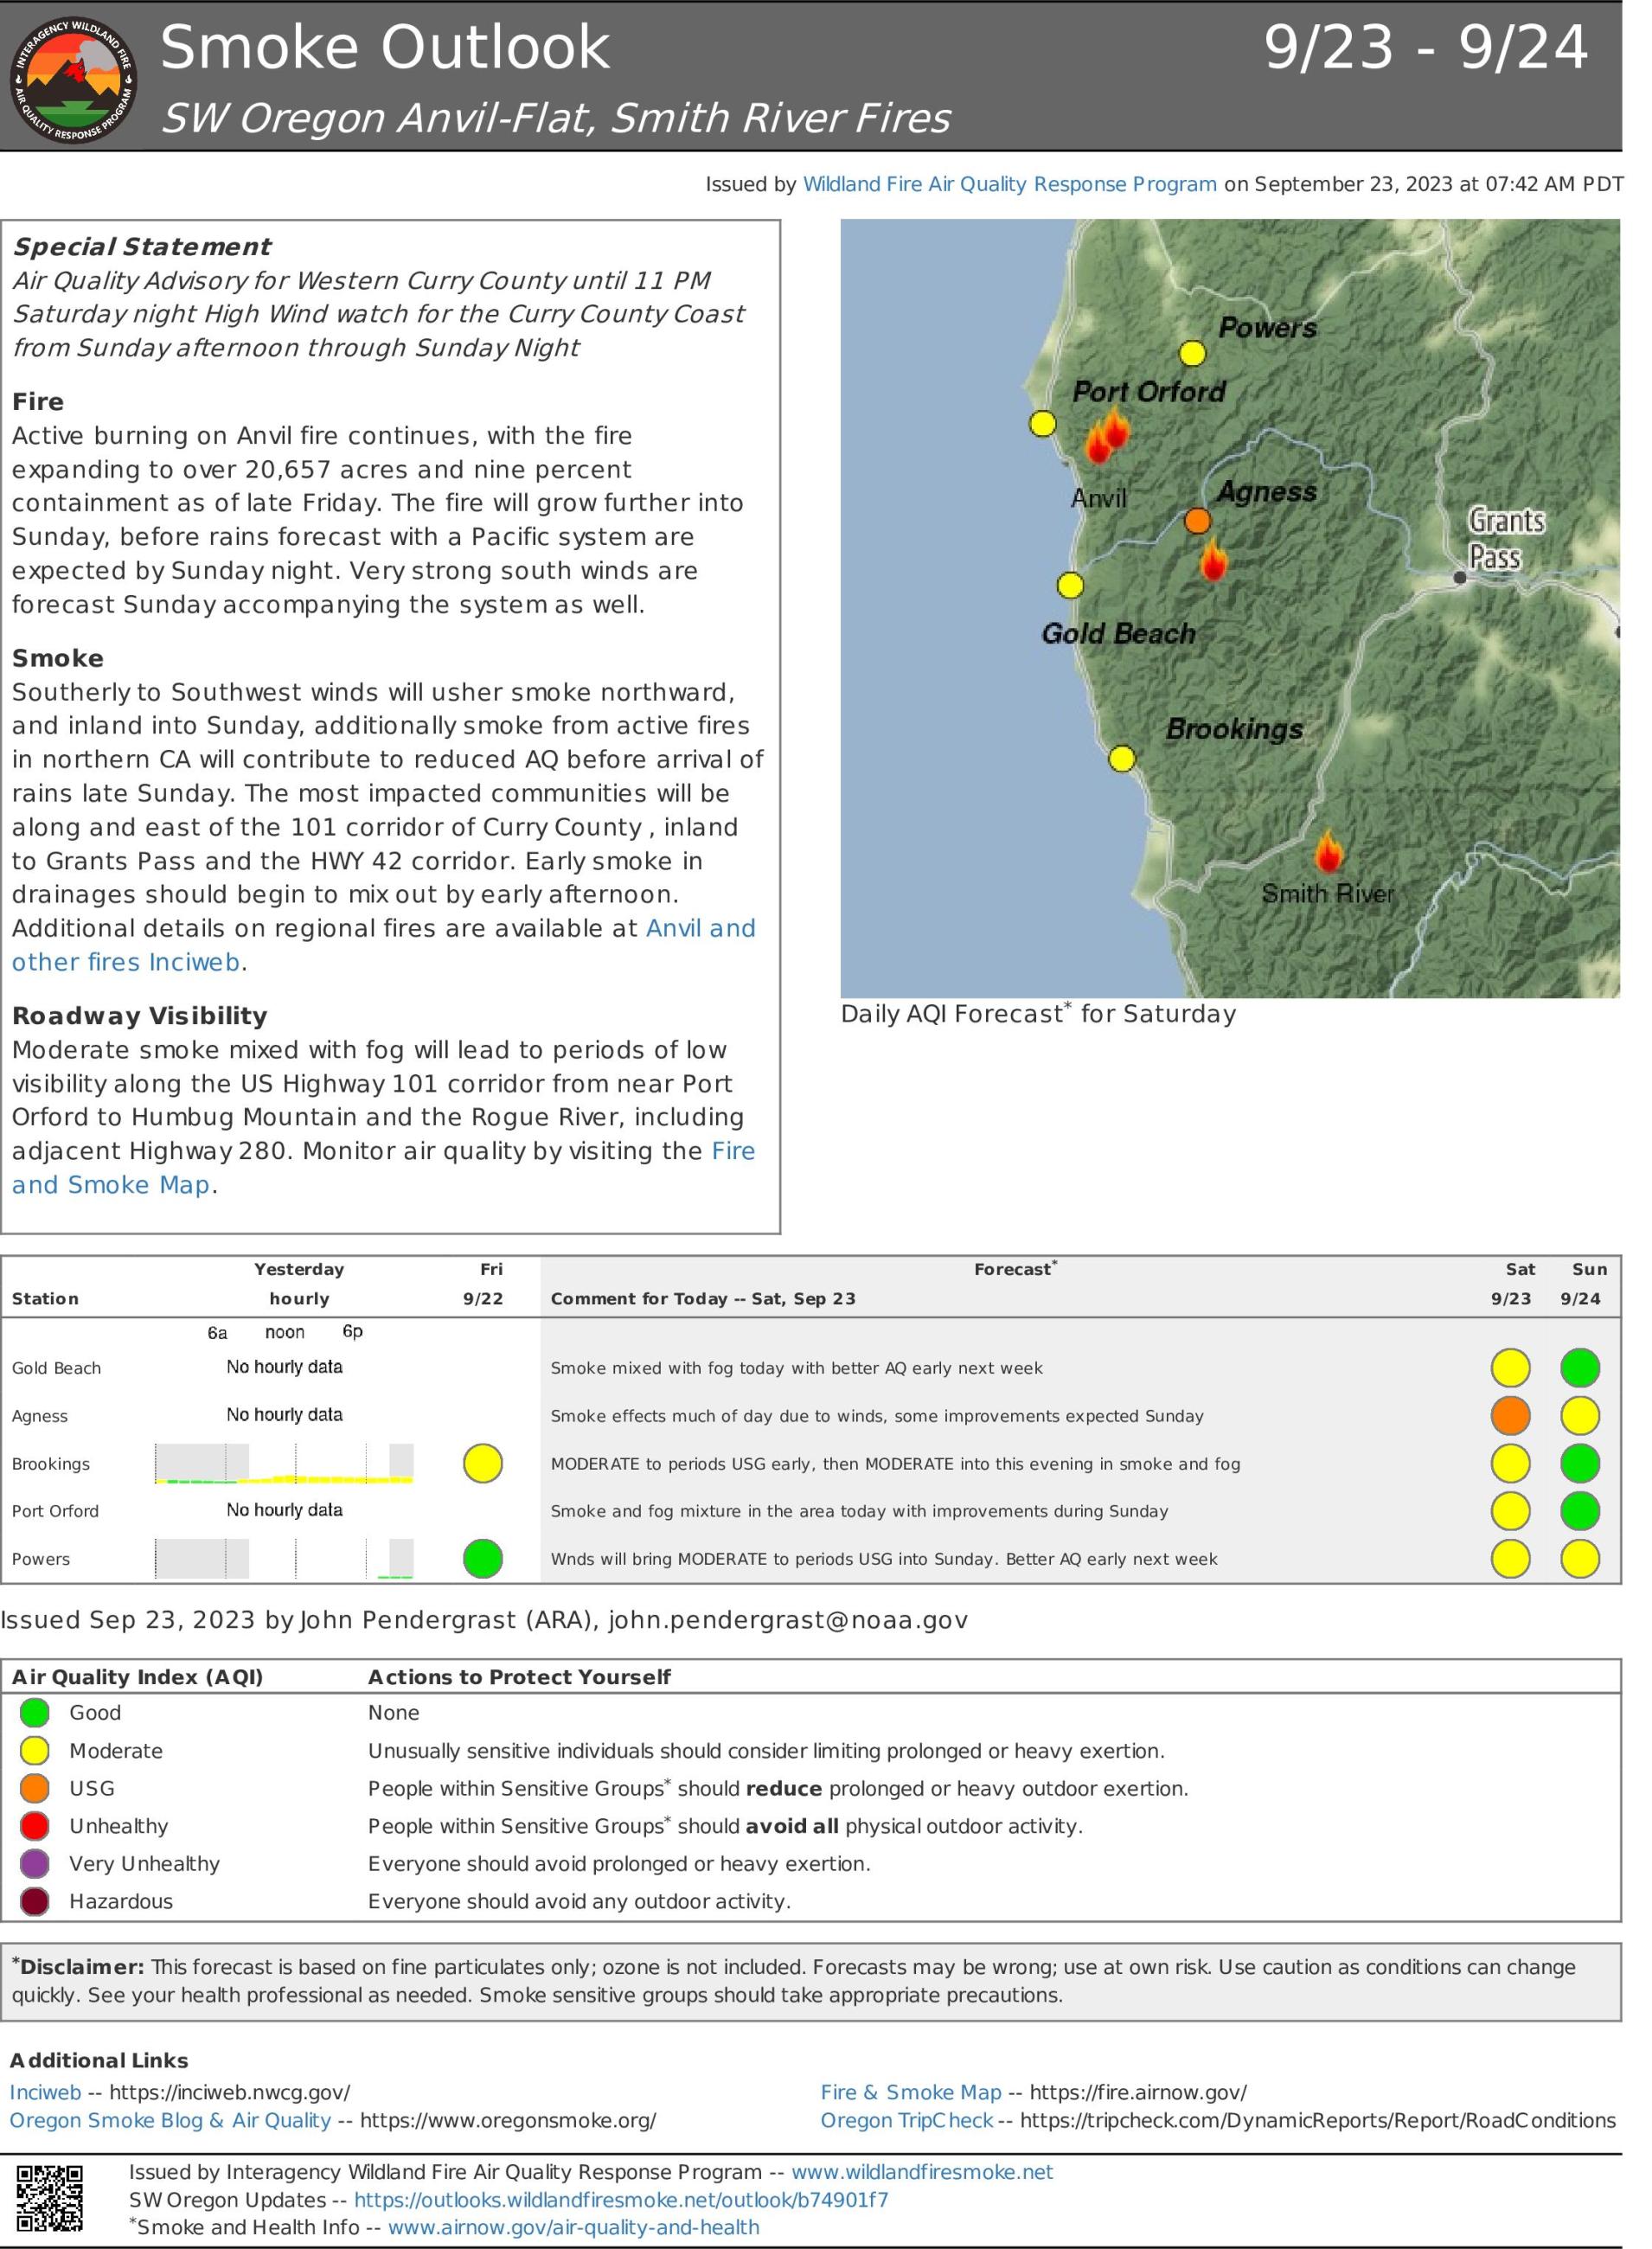 Smith River Complex North - Smoke Outlook - September 23, 2023